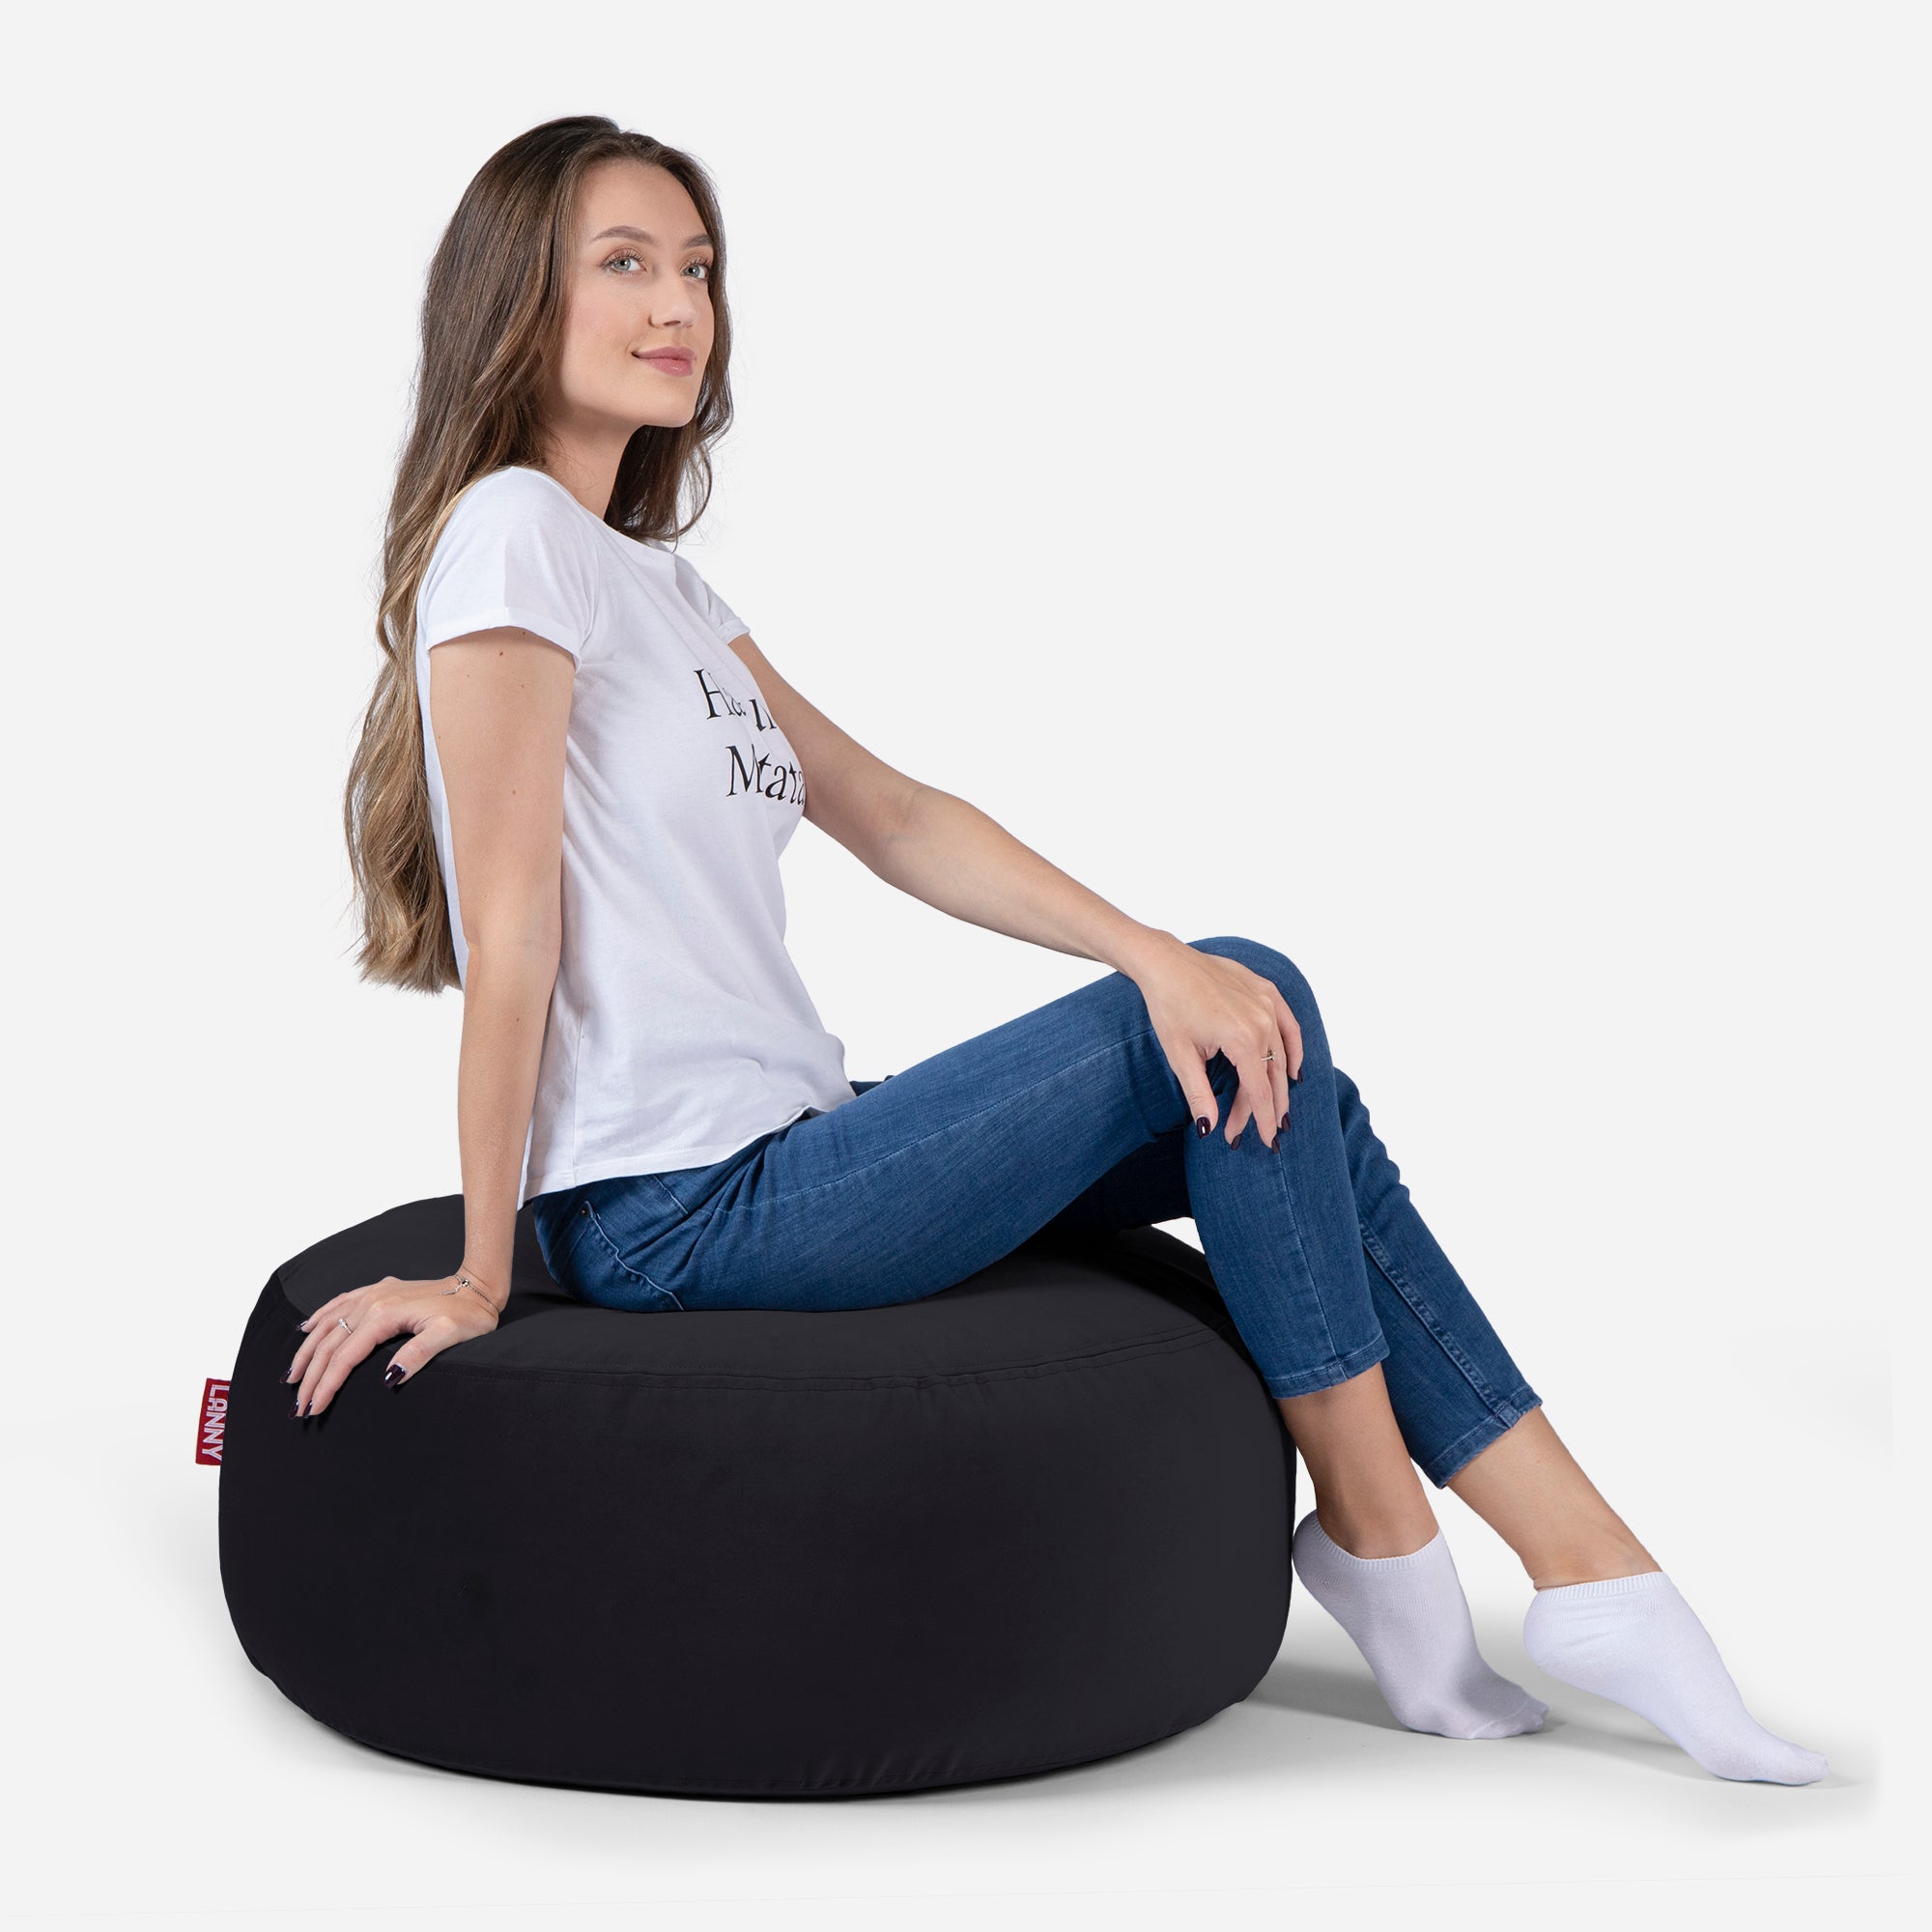 girl siting on Lanny pouf made from velvet fabric in Black color